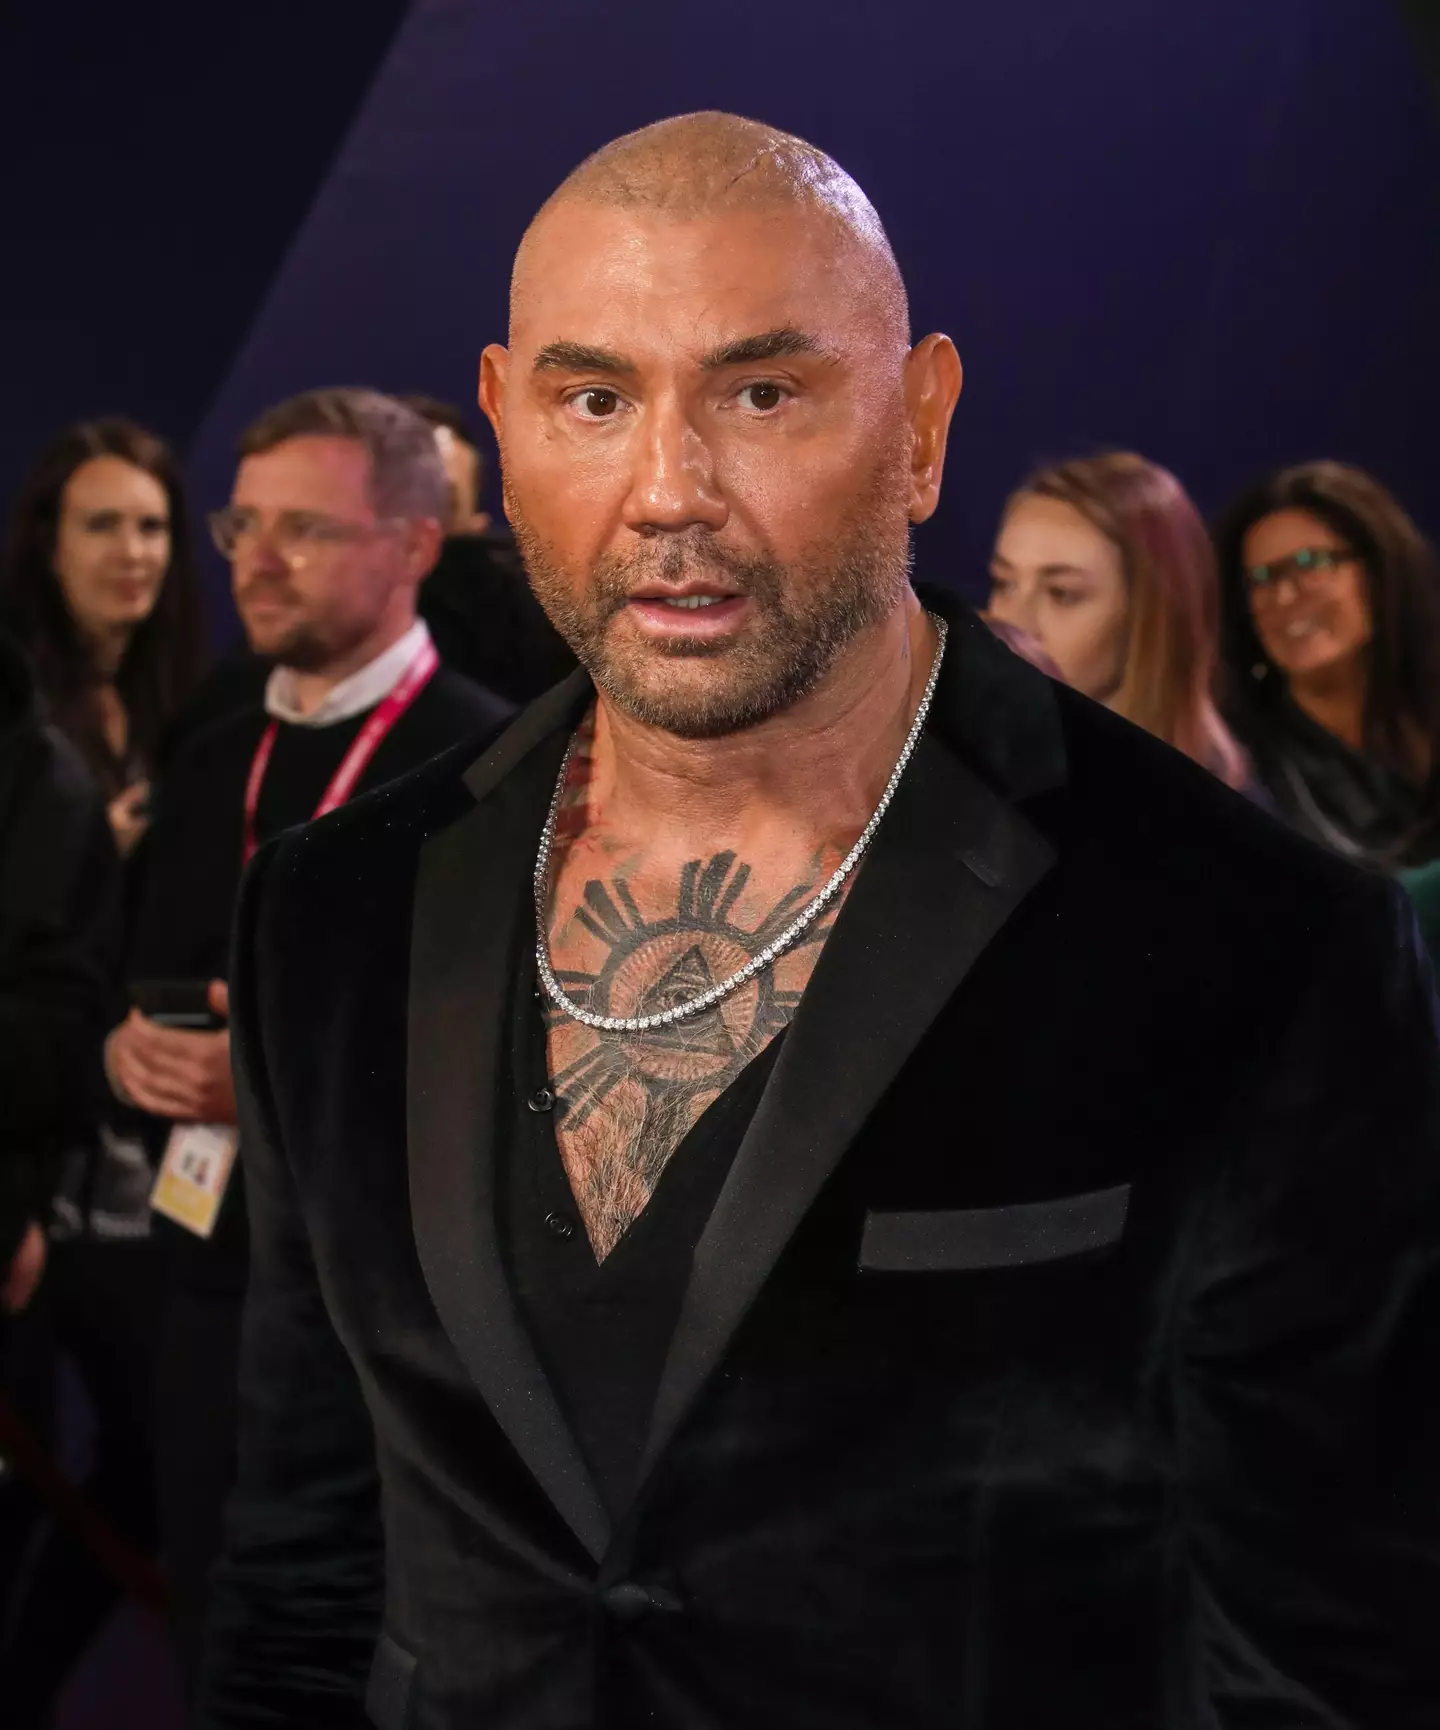 David Bautista is keen on the role.